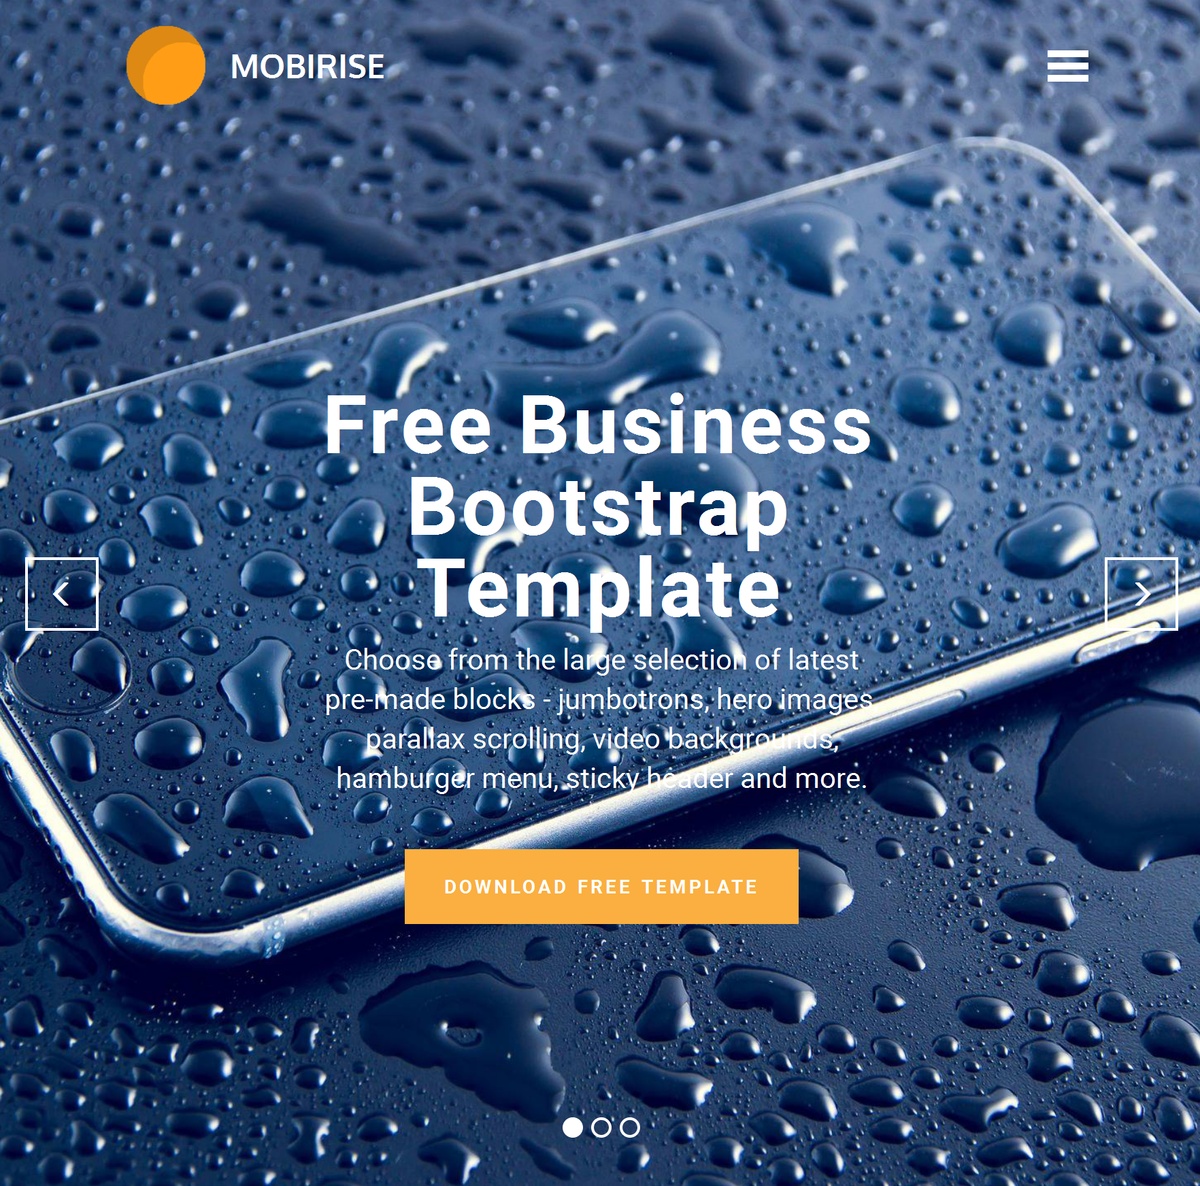 Simple Responsive Web Templates Themes Extensions